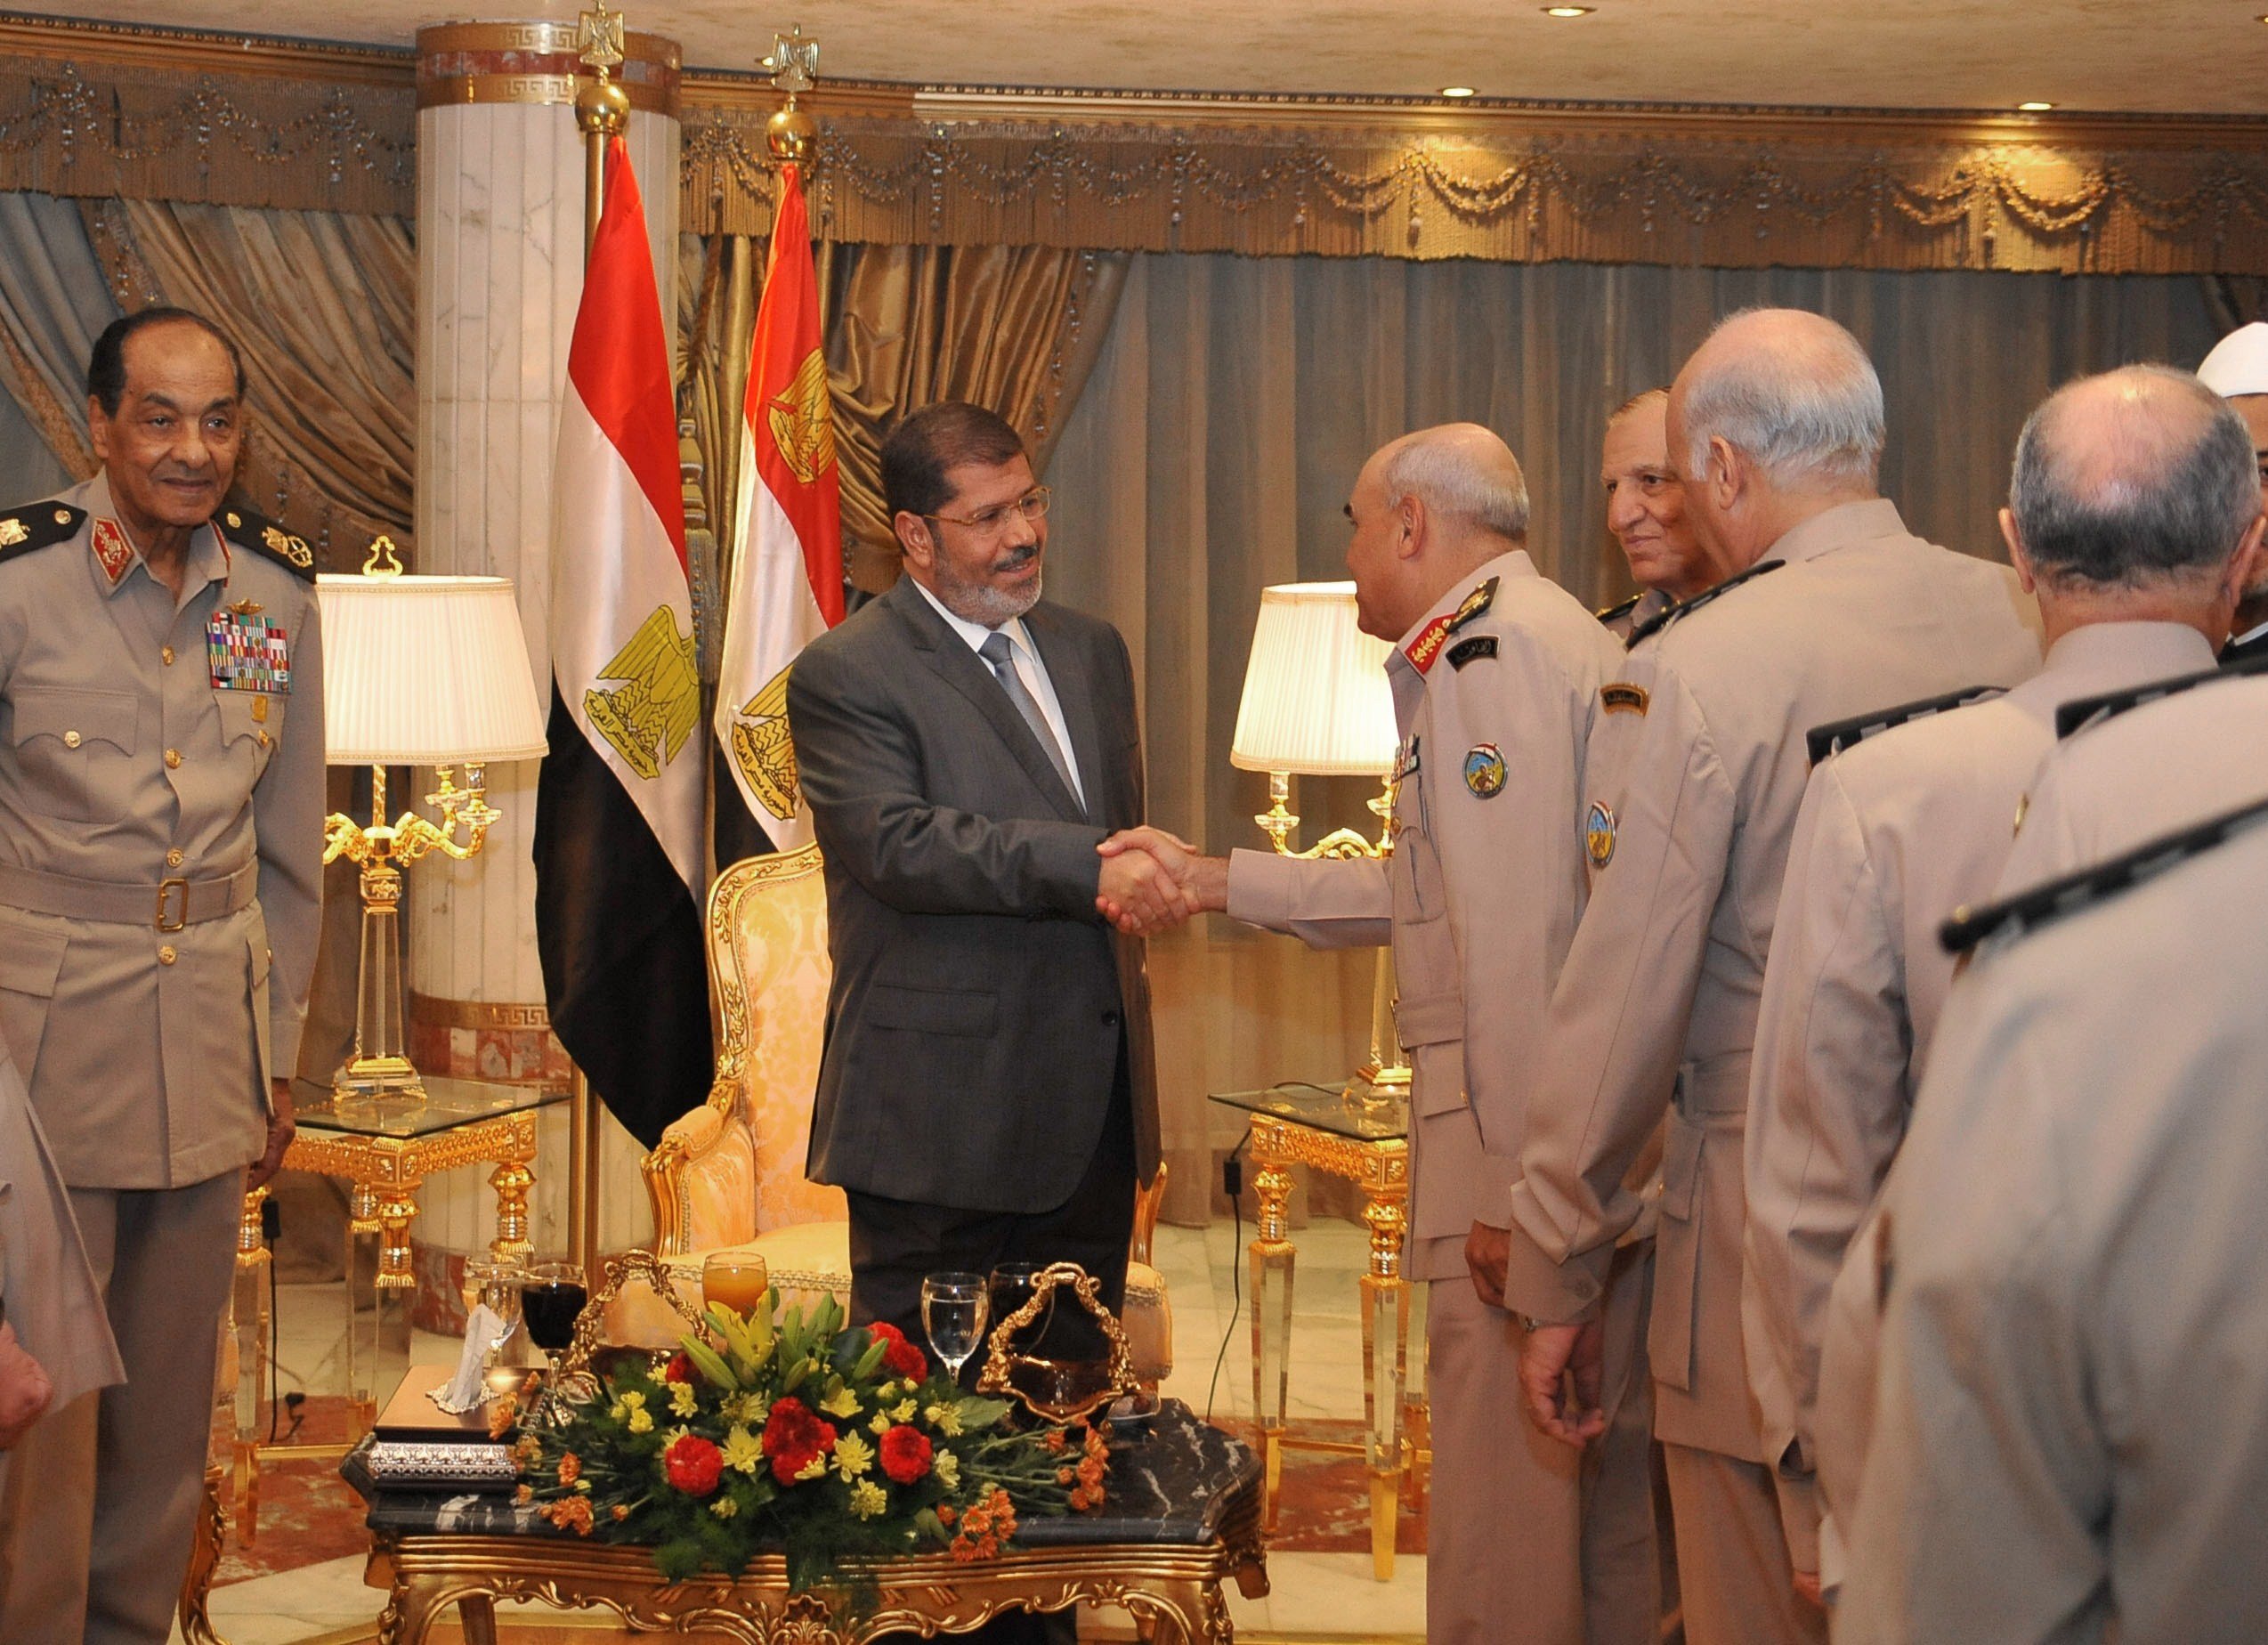 This handout picture released by the Egyptian presidency shows Egyptian President Mohamed Mursi (C) meeting with Field Marshal Hussein Tantawi (L), Egyptian Armed Forces Chief Of Staff Sami Anan (2nd R) and members of the Egyptian Supreme Council of Armed forces ahead of an Iftar meal ceremony at the Al-Jalaa military club in Cairo on July 29, 2012 (photo: AFP /HO/EGYPTIAN PRESIDENCY)